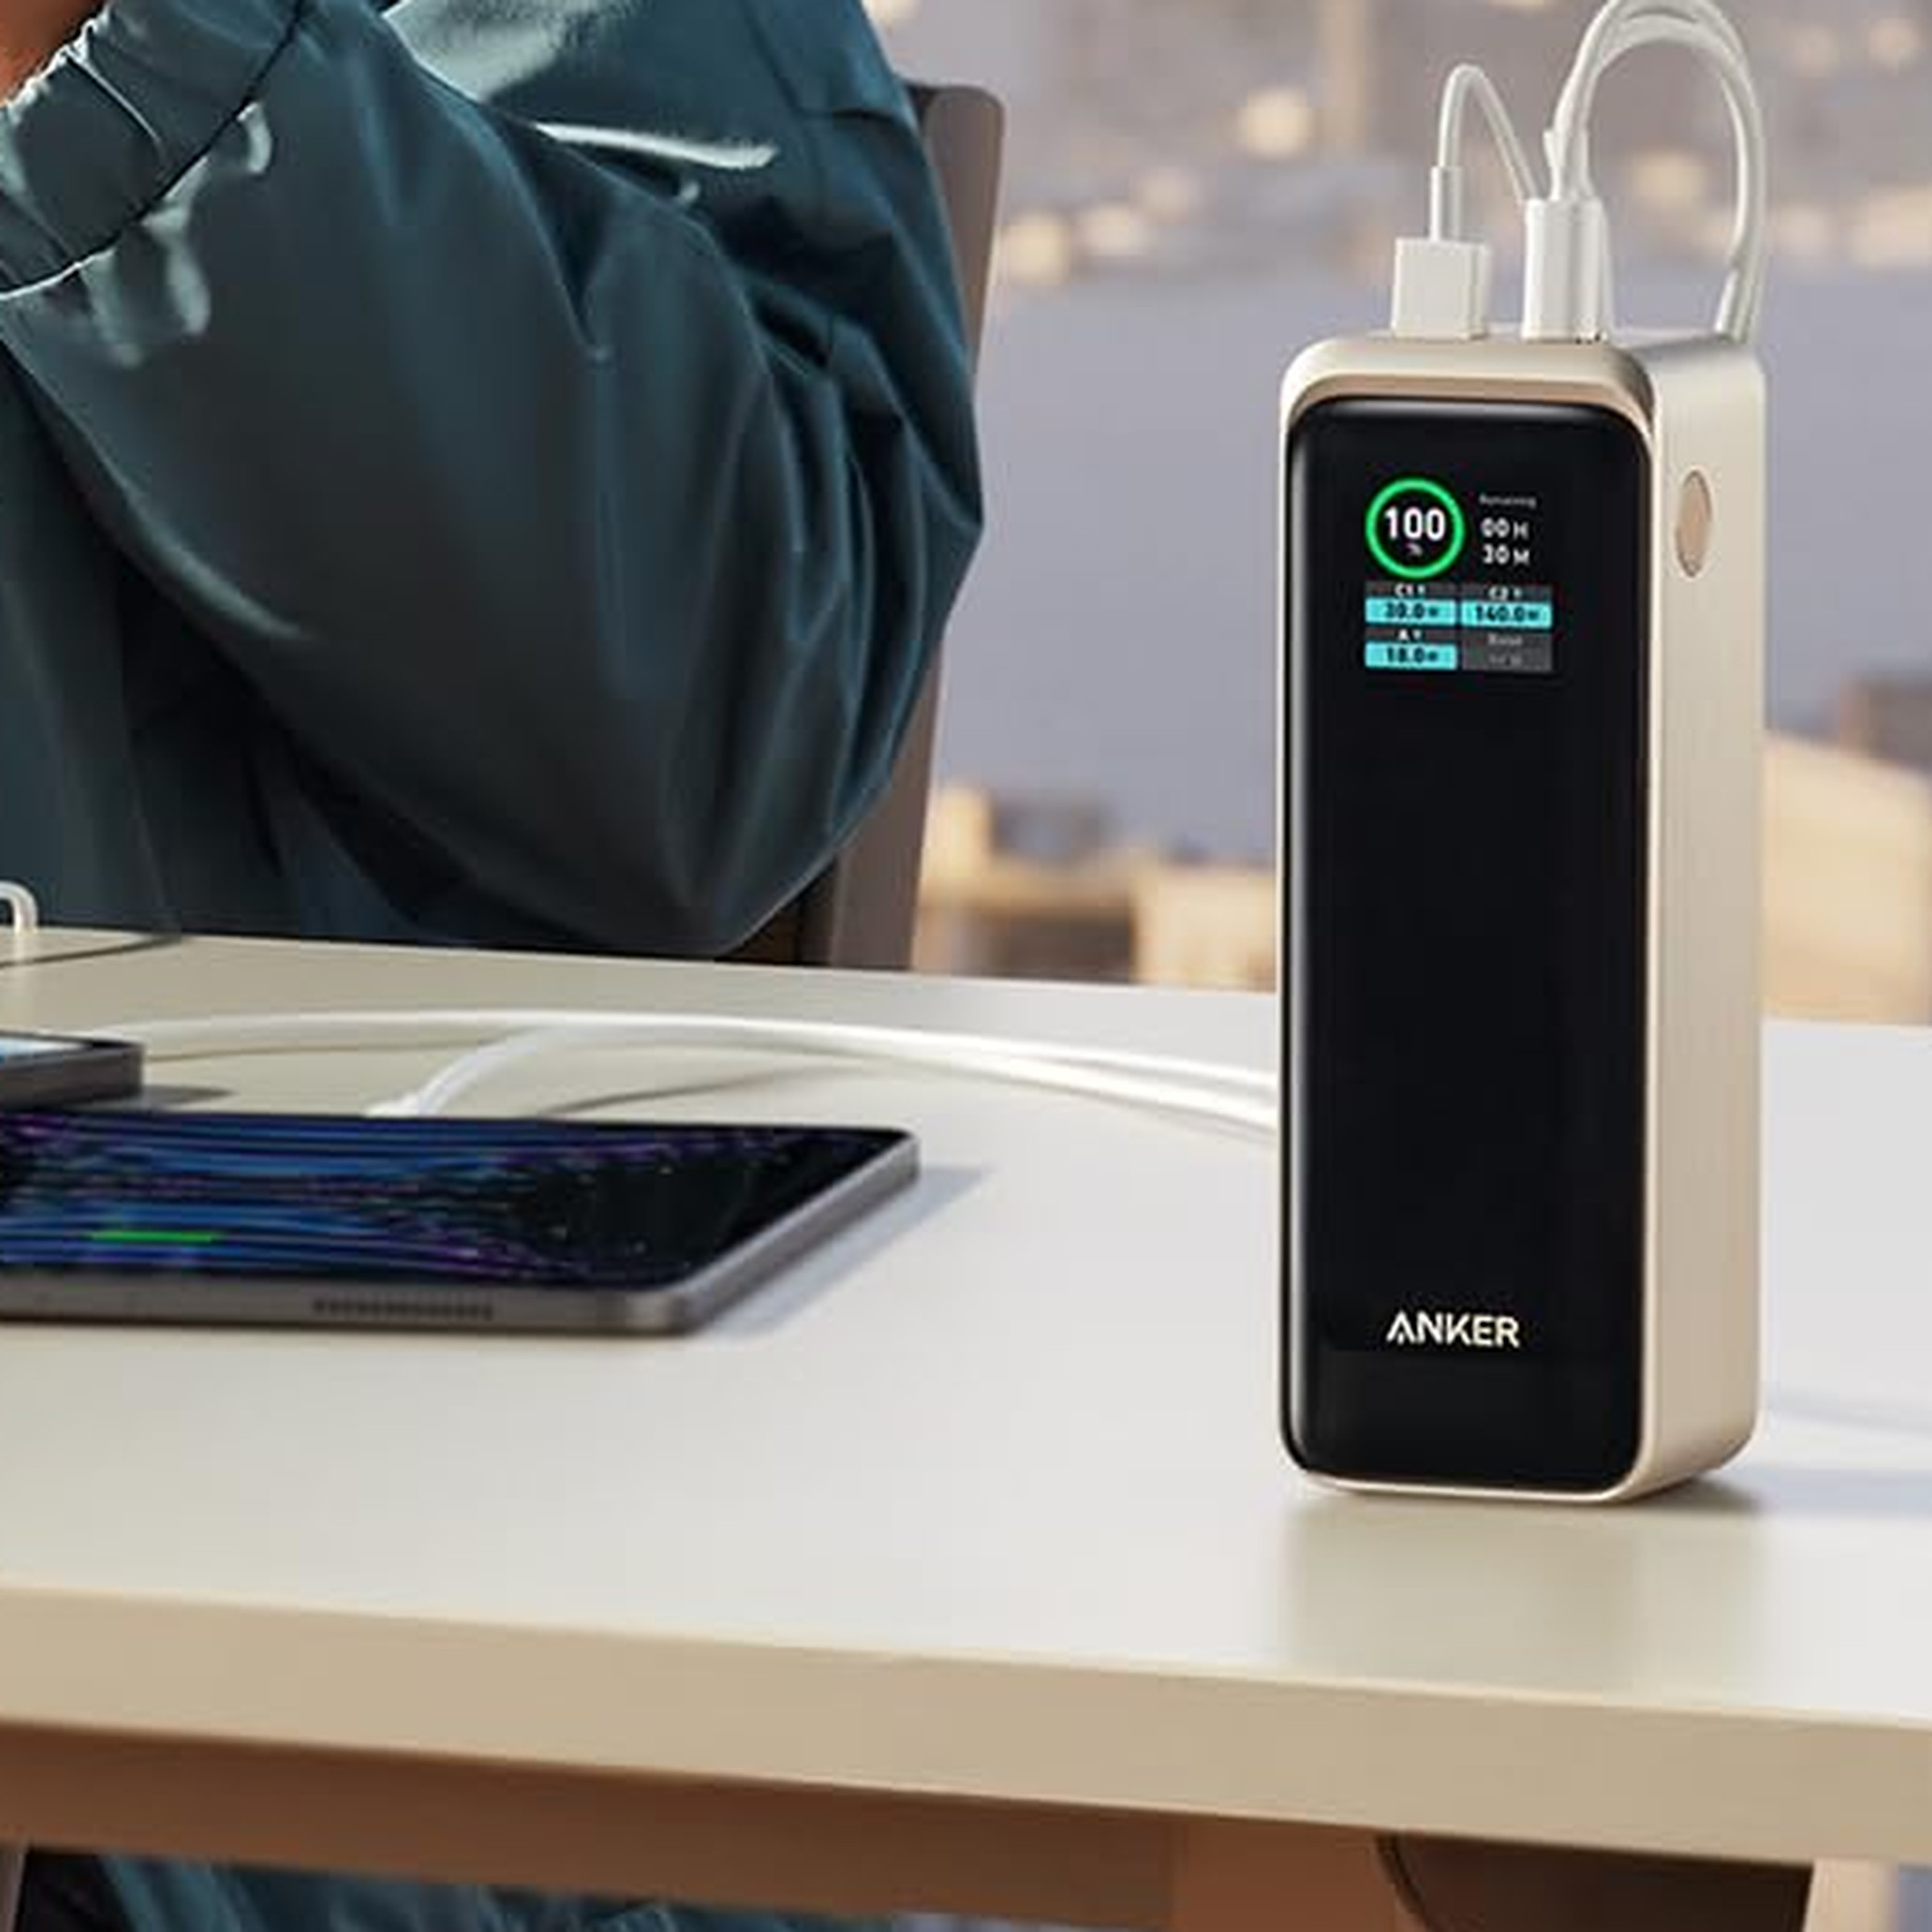 Anker power bank sitting on table